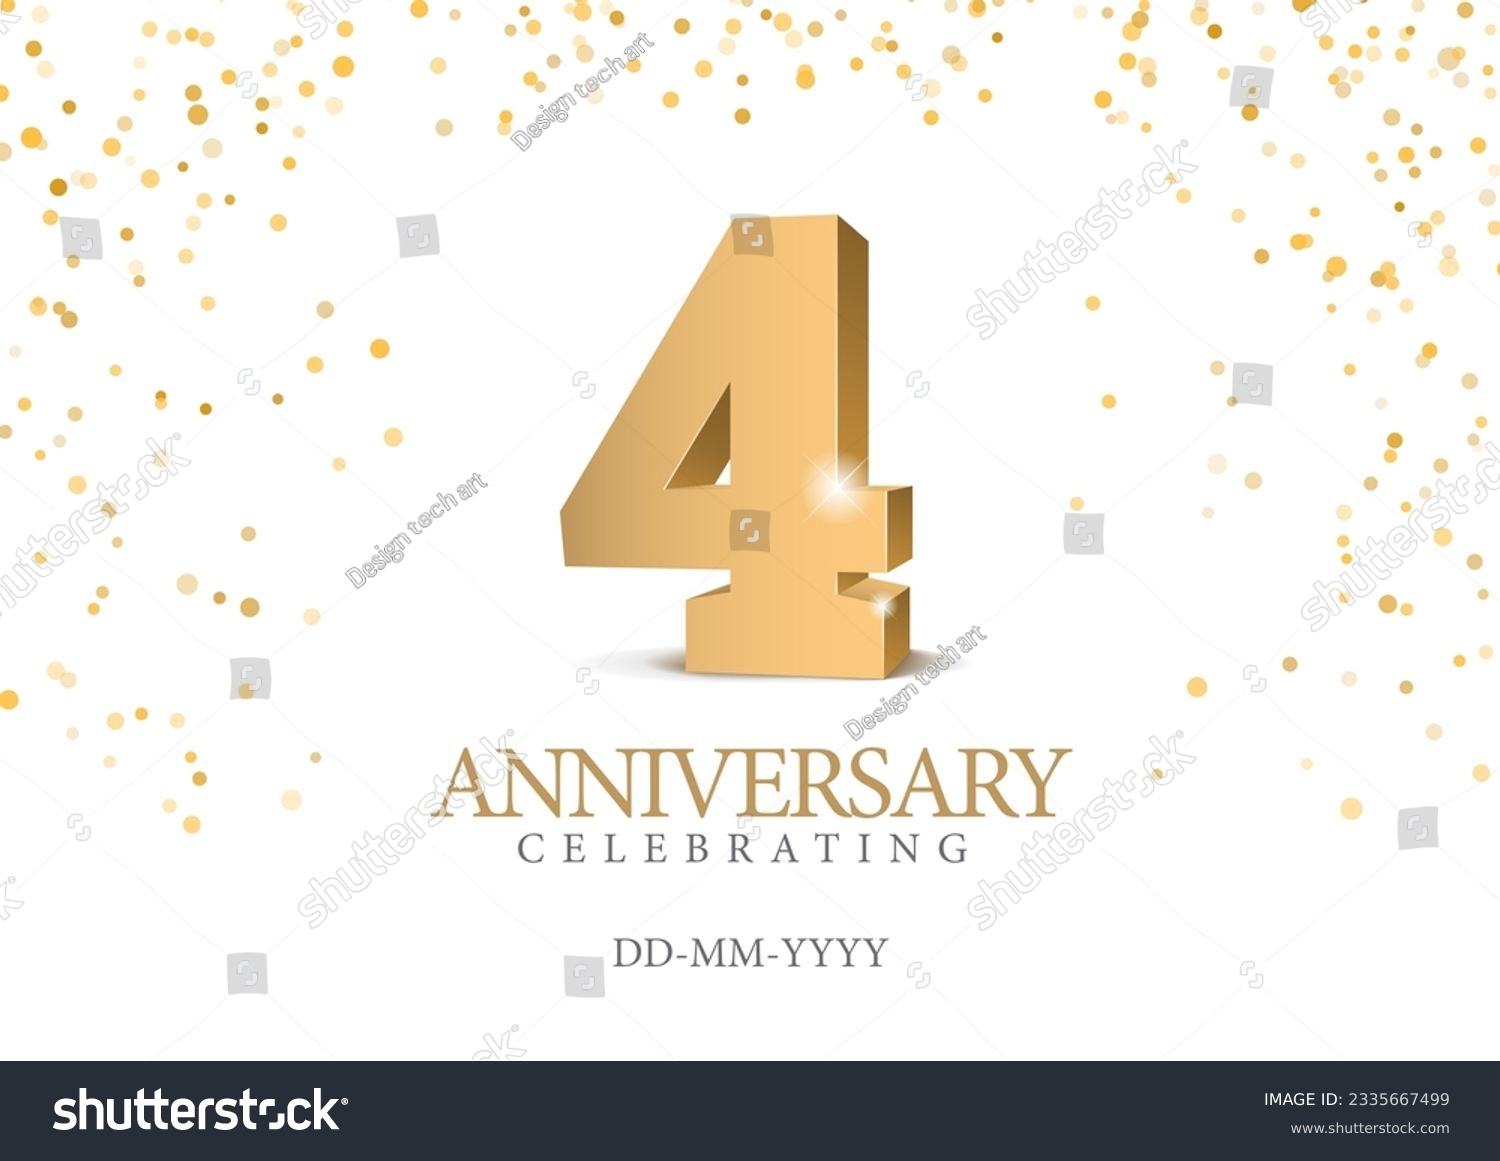 SVG of Anniversary 4. gold 3d numbers. Poster template for Celebrating 4 th anniversary event party. Vector illustration svg